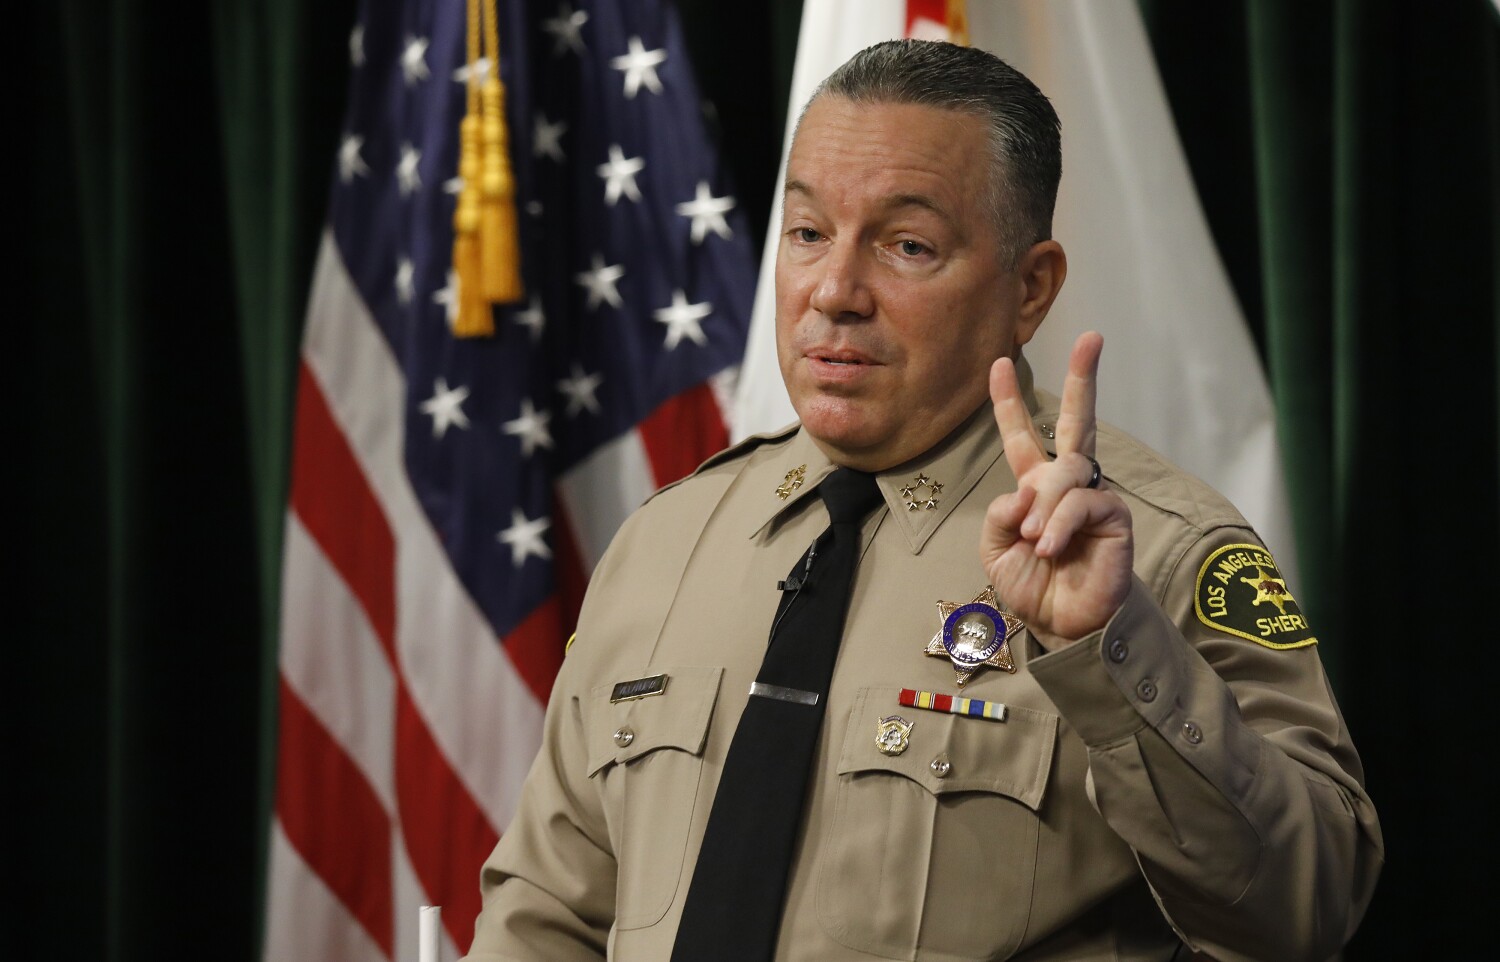 Column: Sheriff Villanueva just showed the world the petty emptiness behind his bluster